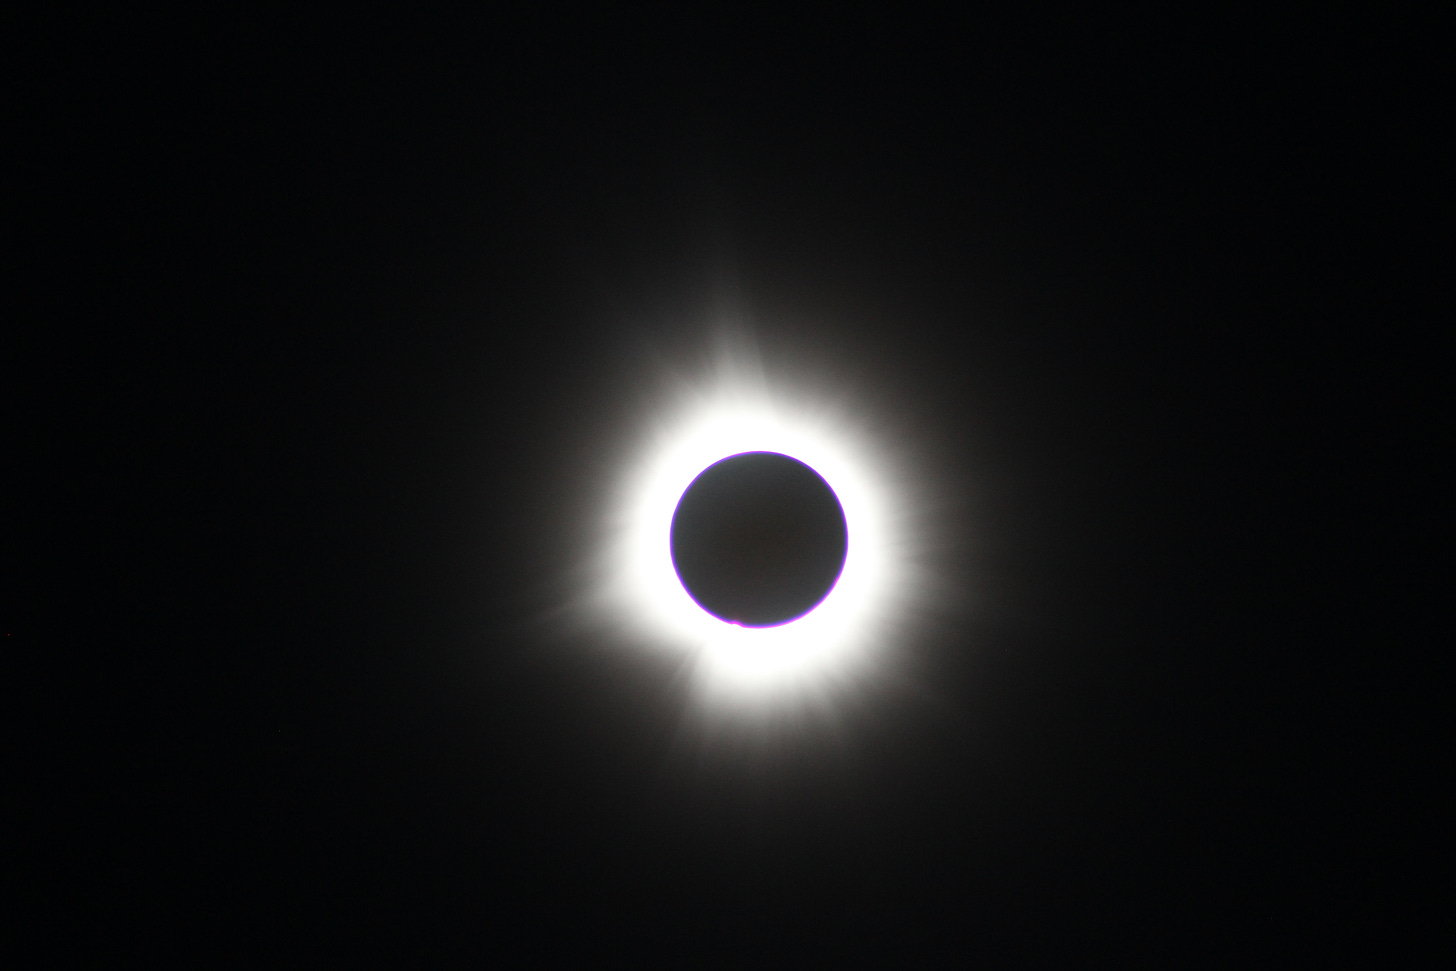 The total solar eclipse as seen from the Adirondacks on Monday, April 8